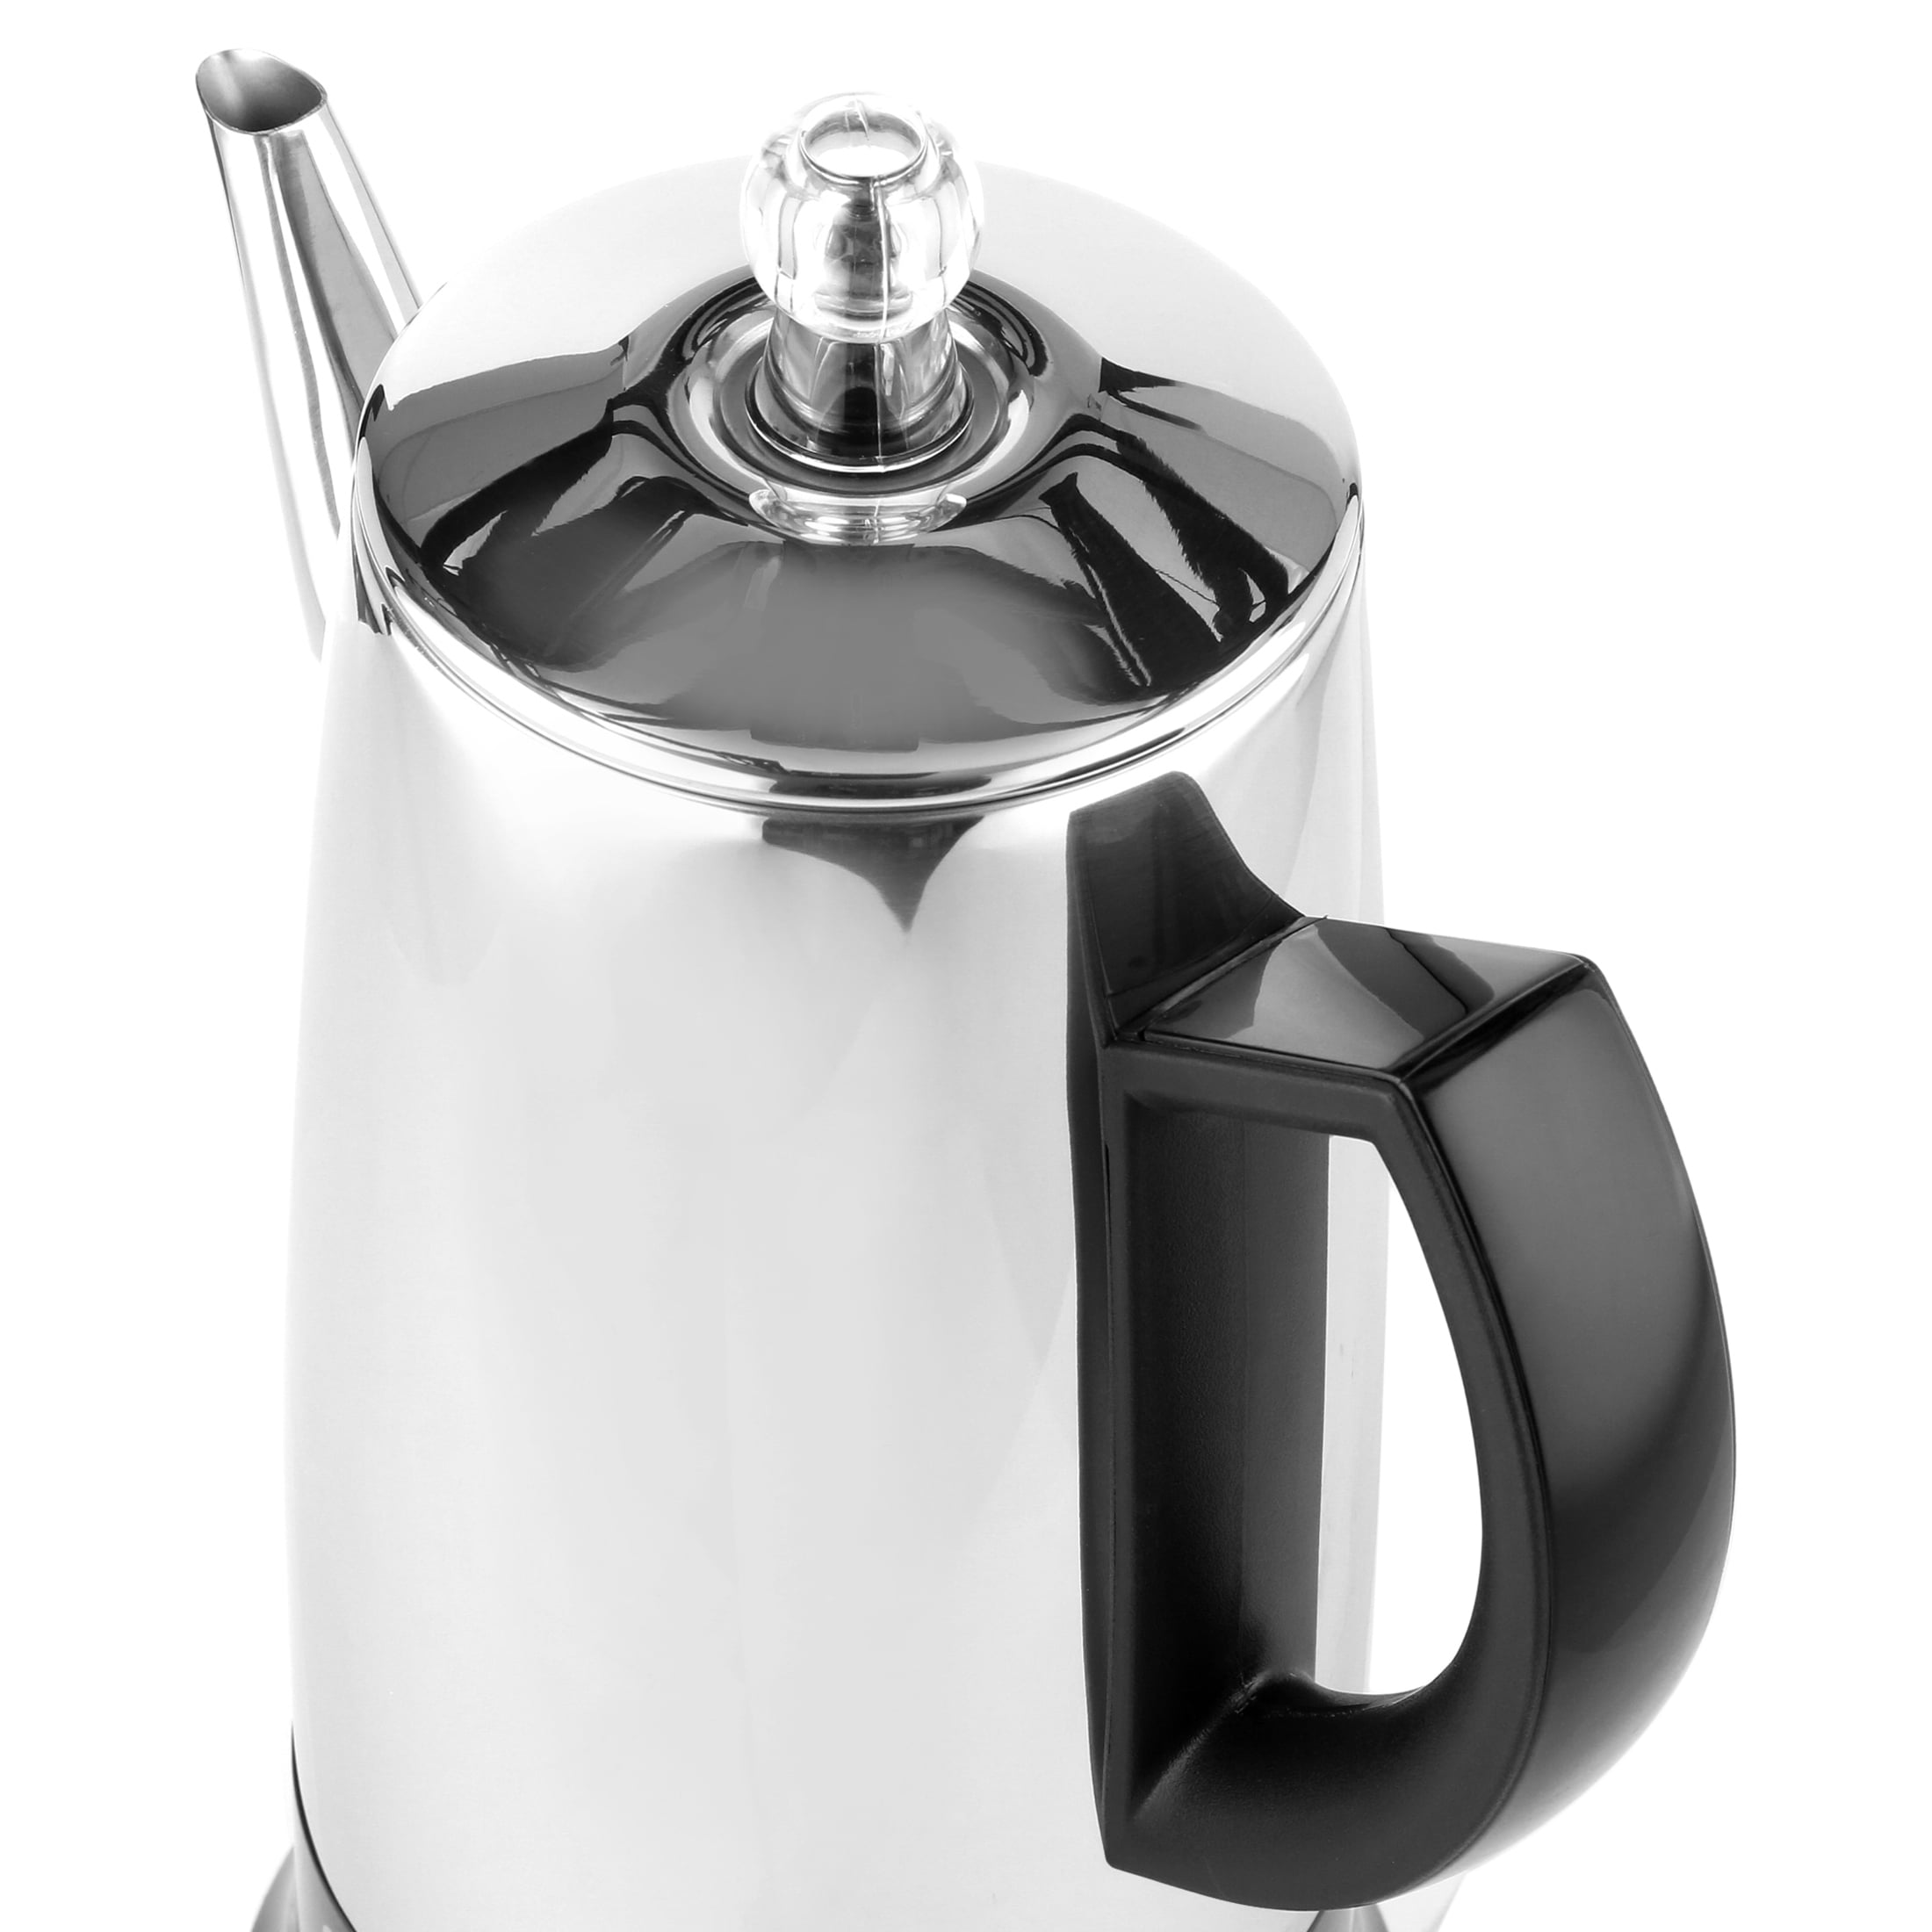 WerkWeit Electric Coffee Percolator 12 Cup Stainless Steel Percolator Coffee Maker with Cord-less Server and Easy Pour Spout